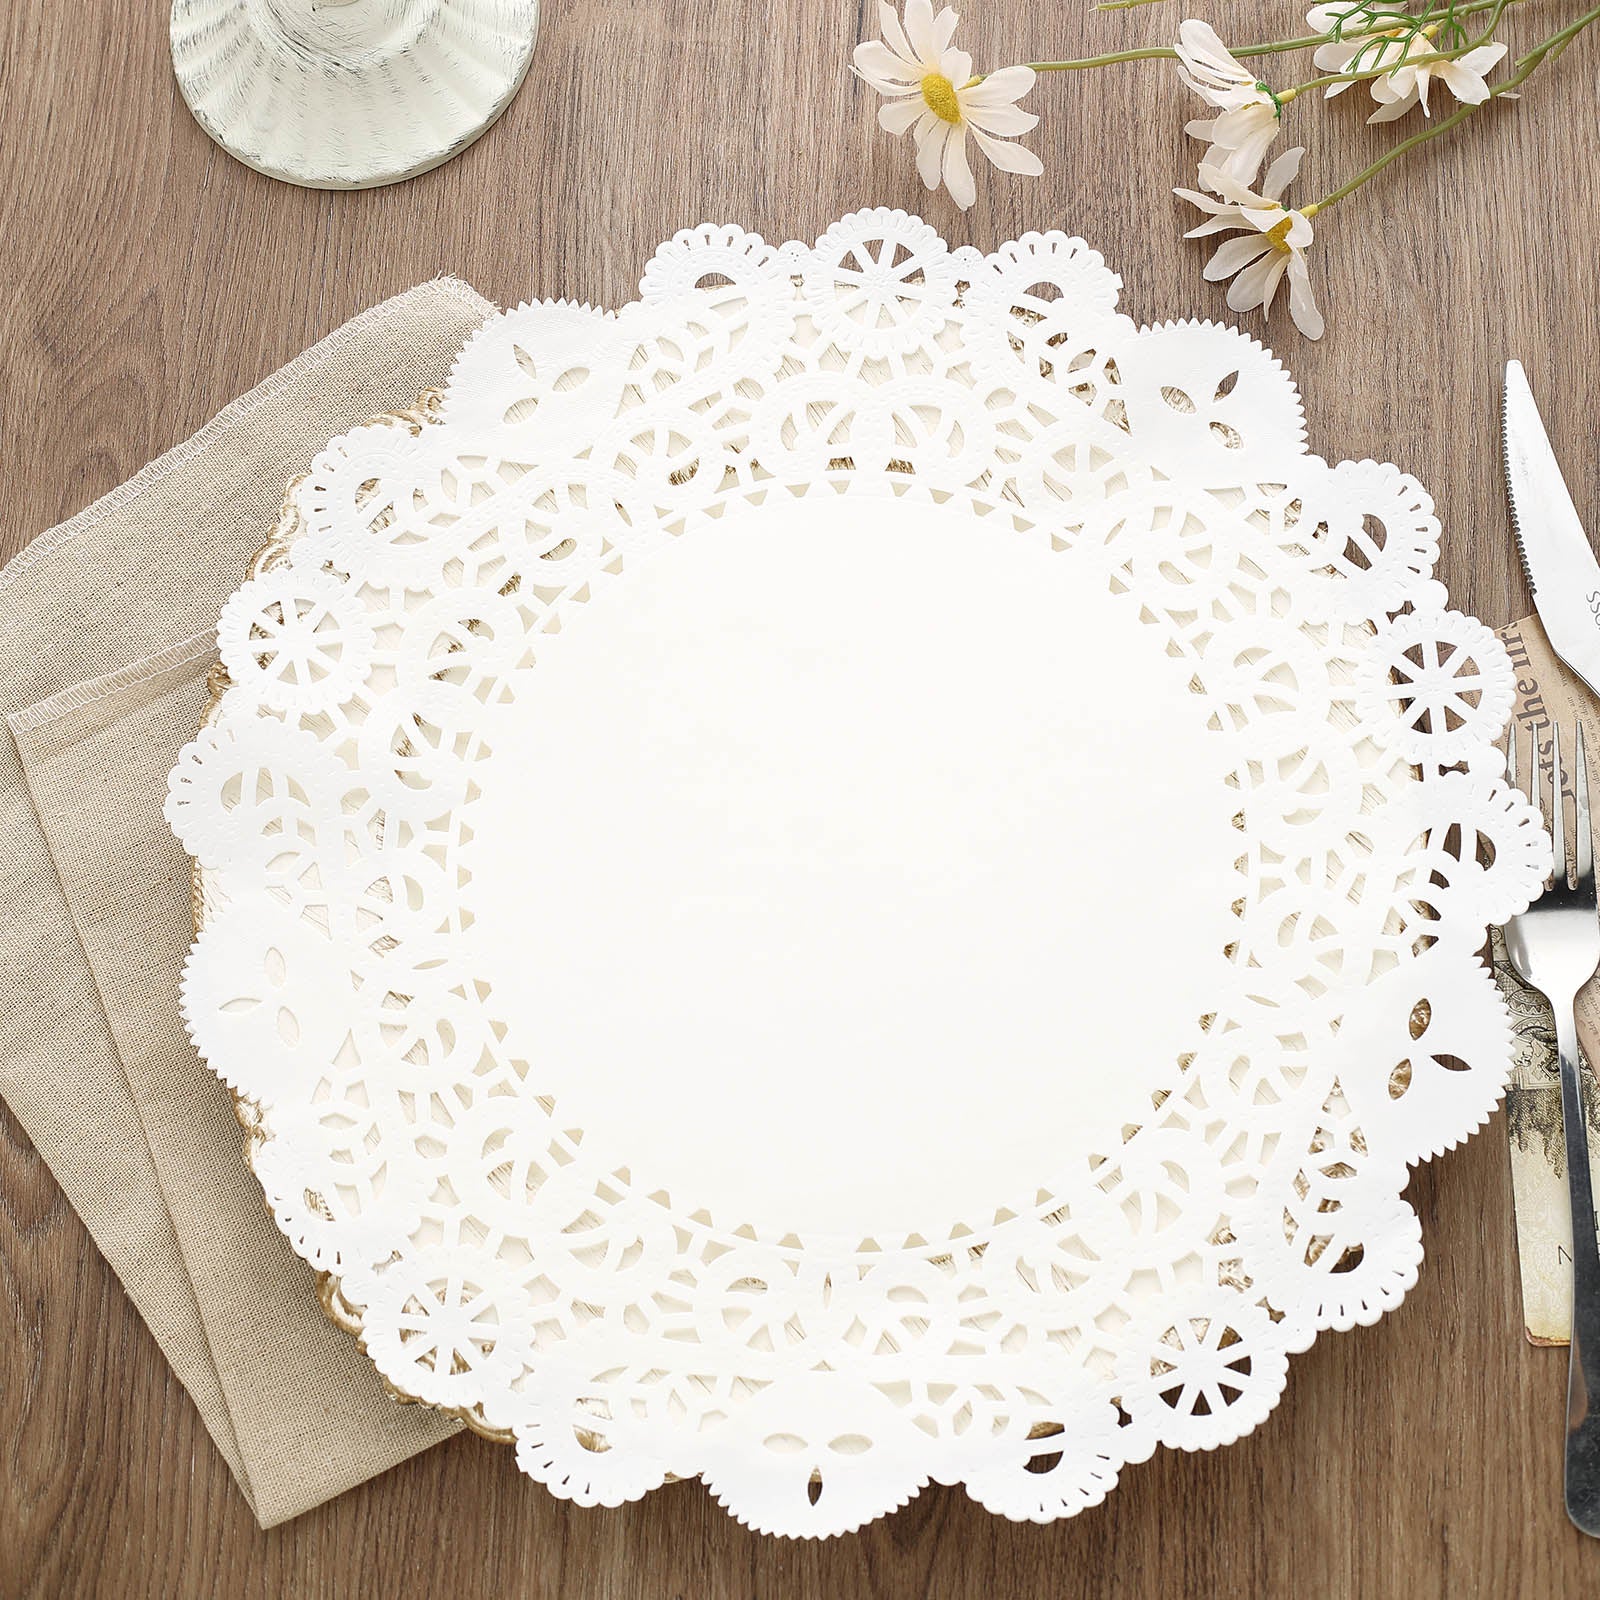 12 inch x 16 inch Rectangle Paper Doilies/Lace Paper Placemats/Disposable  Greaseproof Doilies,White,Pack of 100